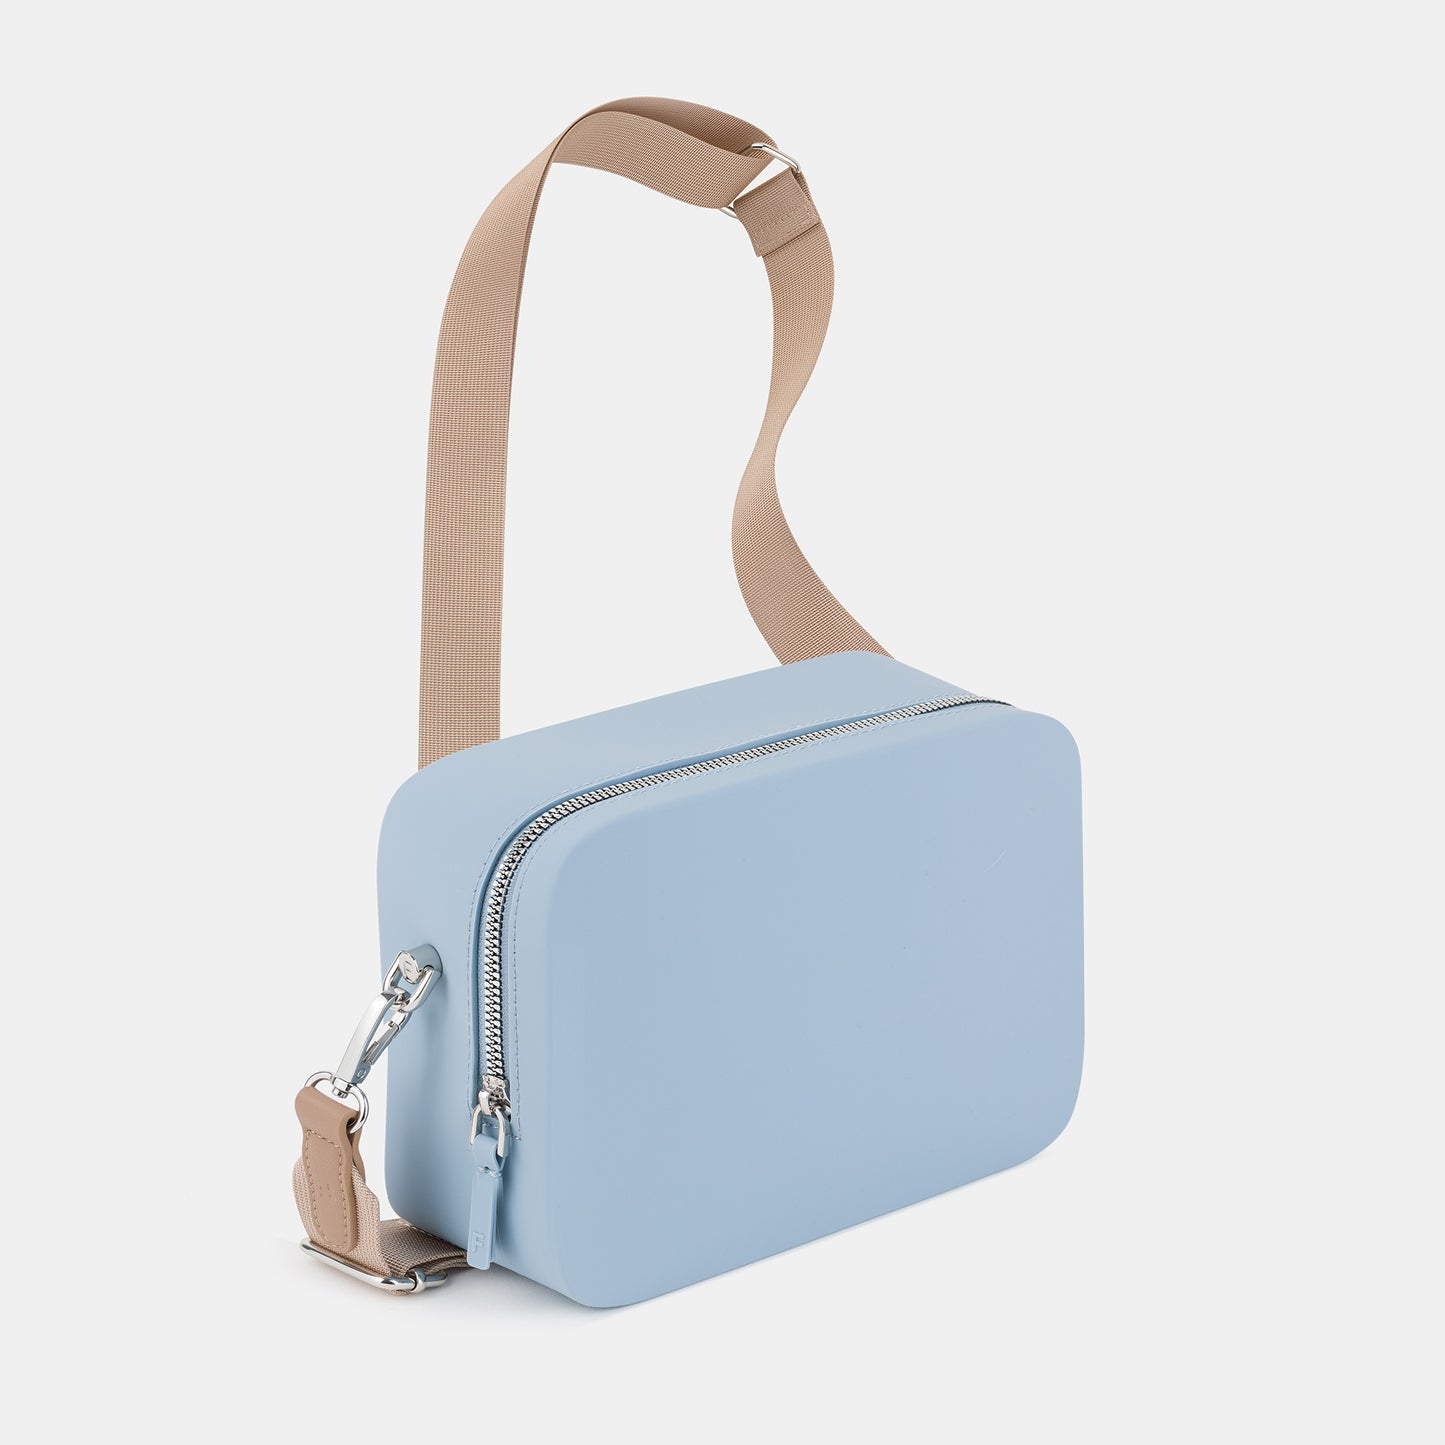 Chelsea Sport | Blue with Light Strap